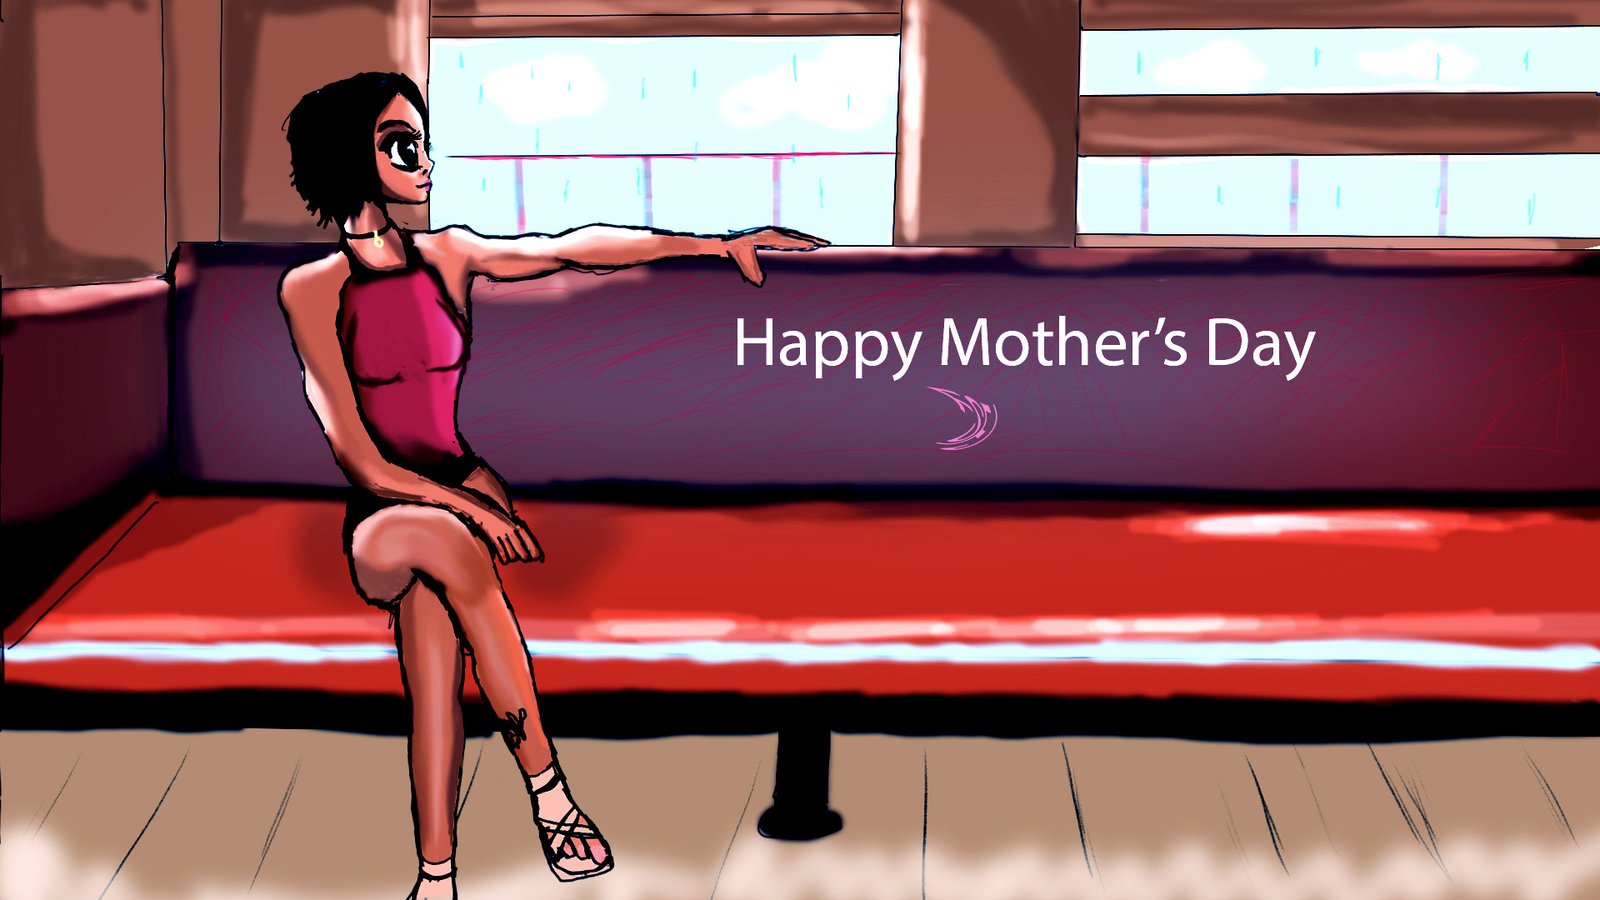 Happy Mother's Day by Fatimah Soltanian Fard Jahromi